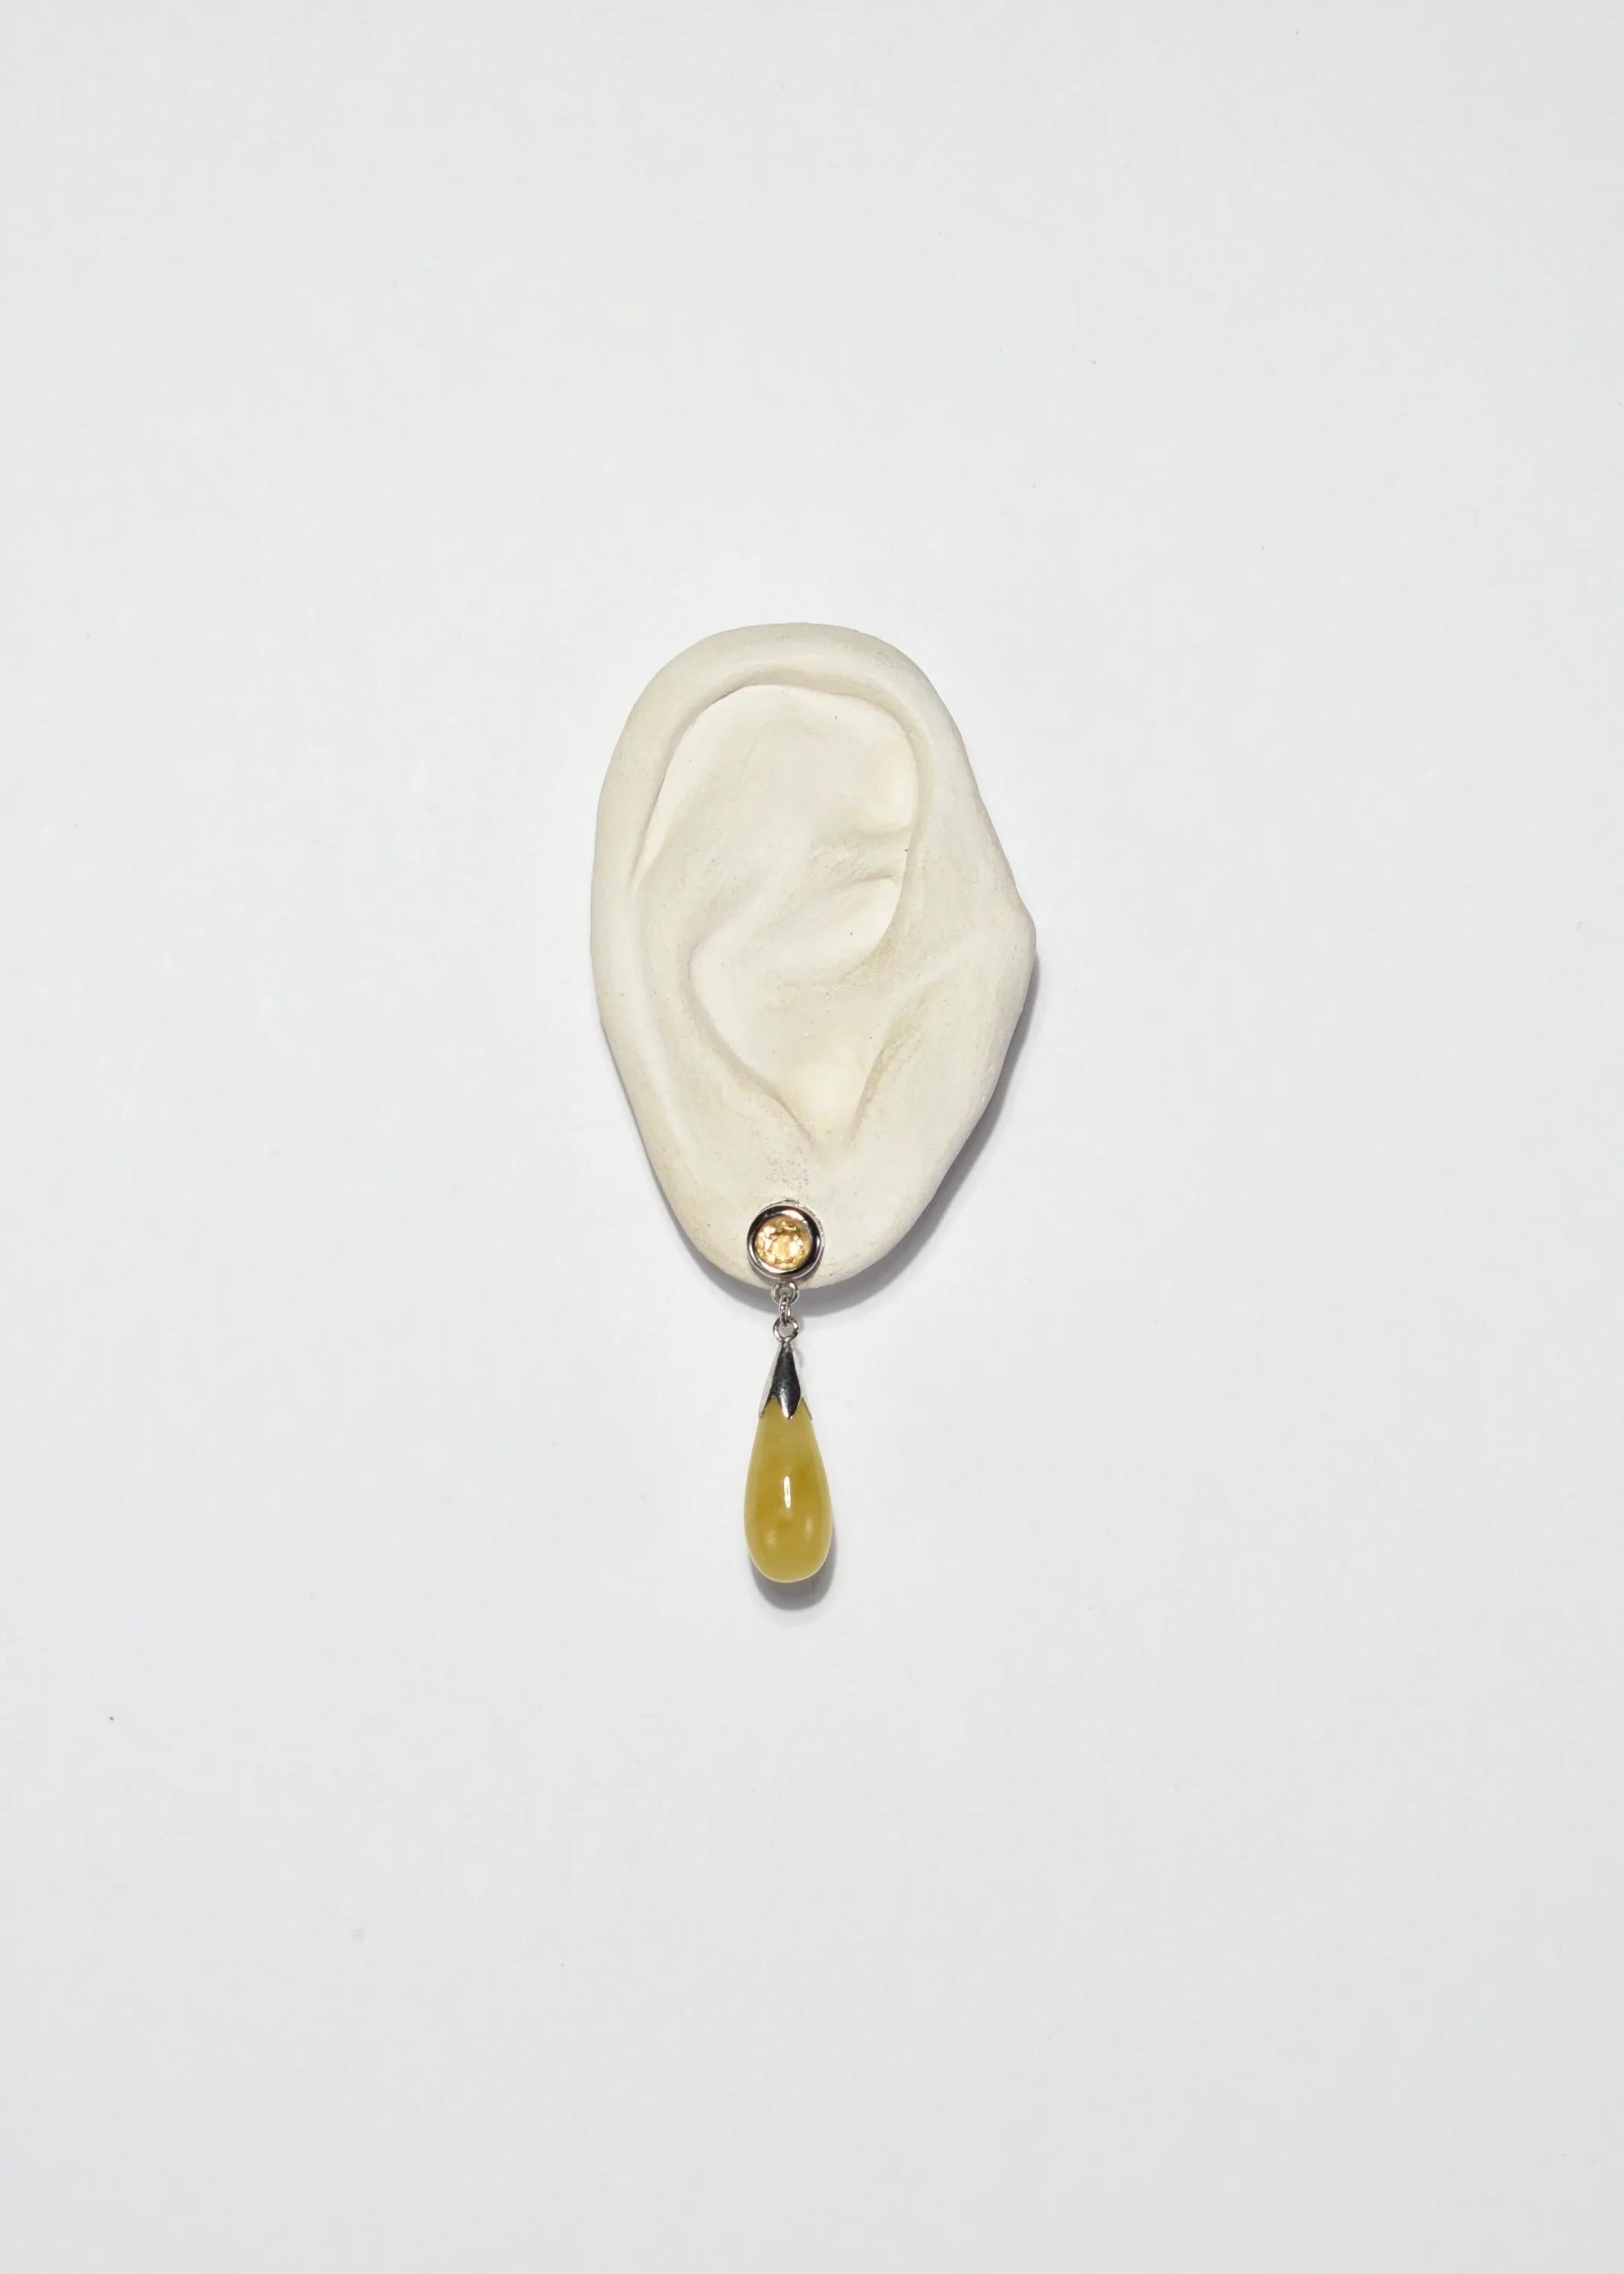 Yellow Drop Earrings In Excellent Condition For Sale In Richmond, VA